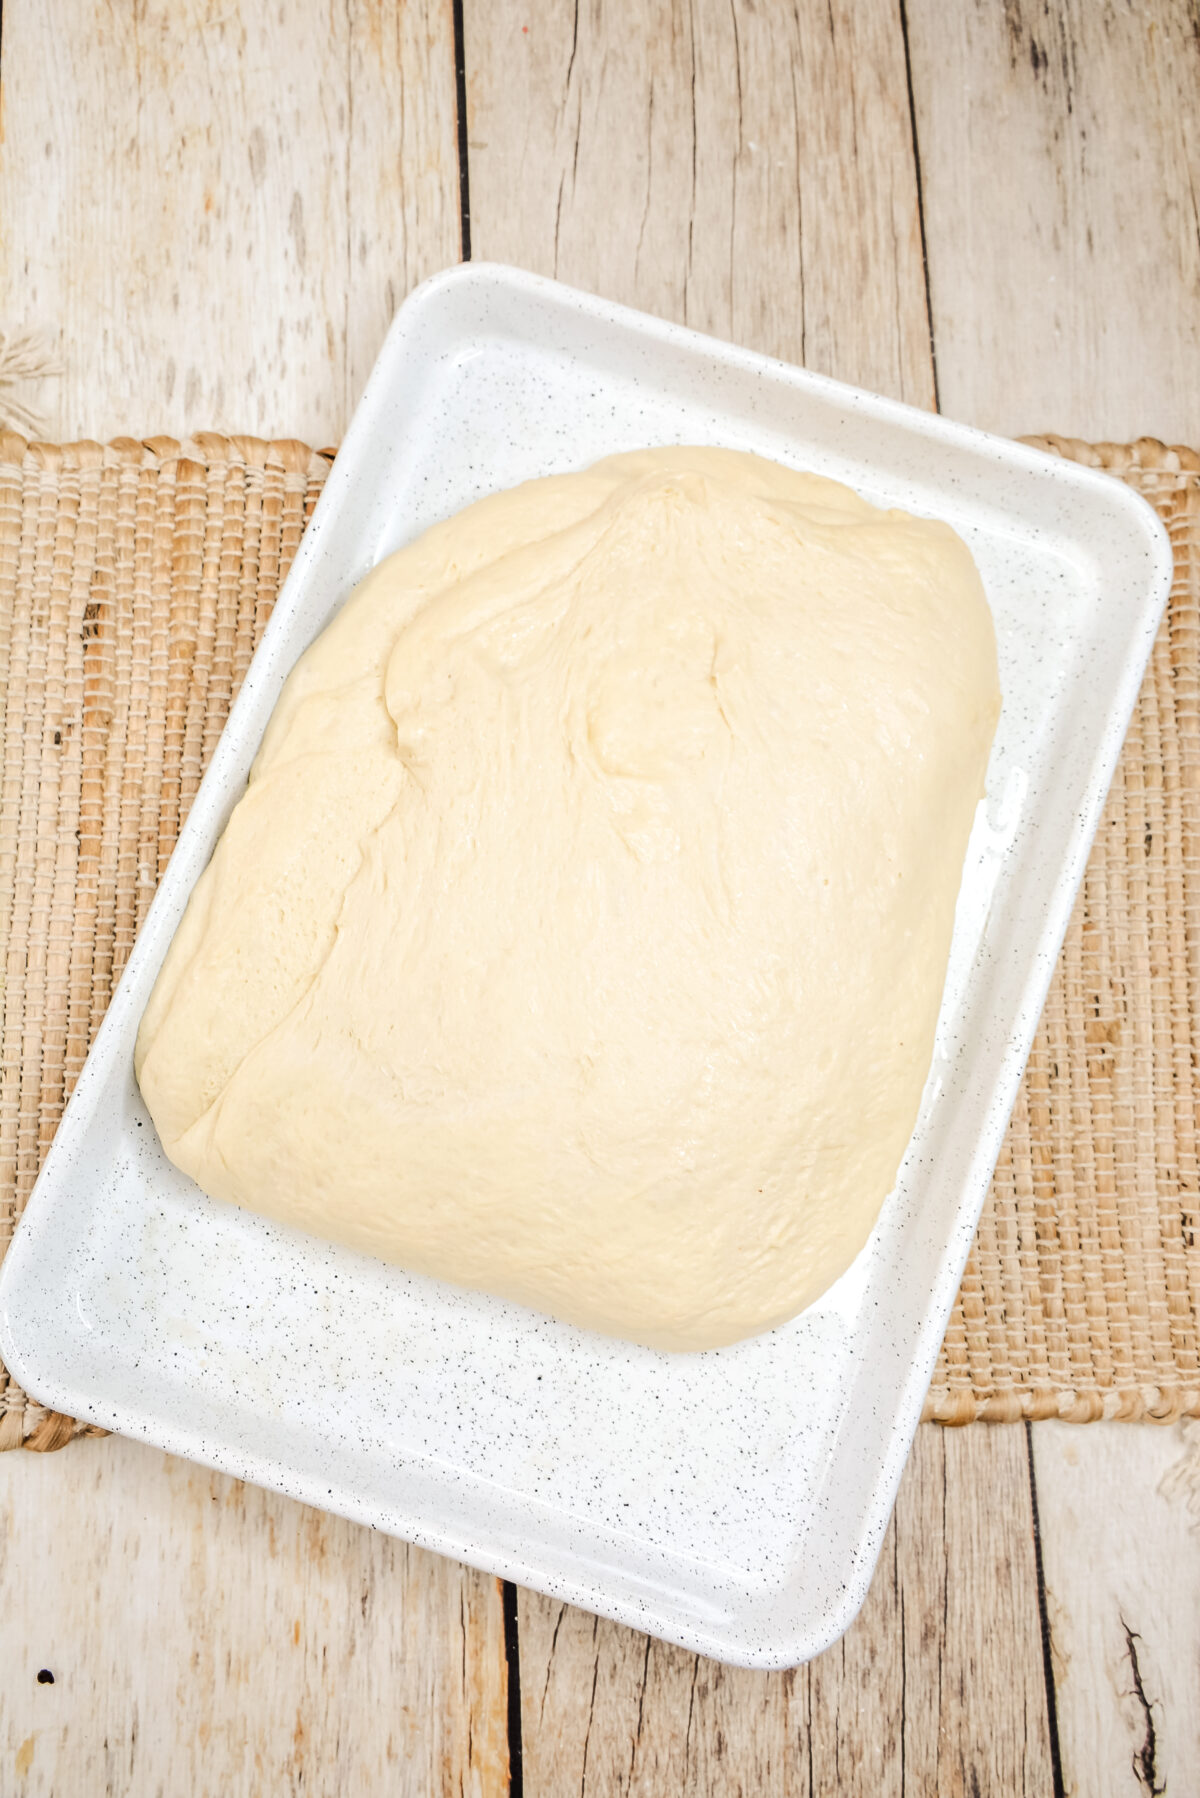 Press the dough out into the sheet pan forming a rectangle.